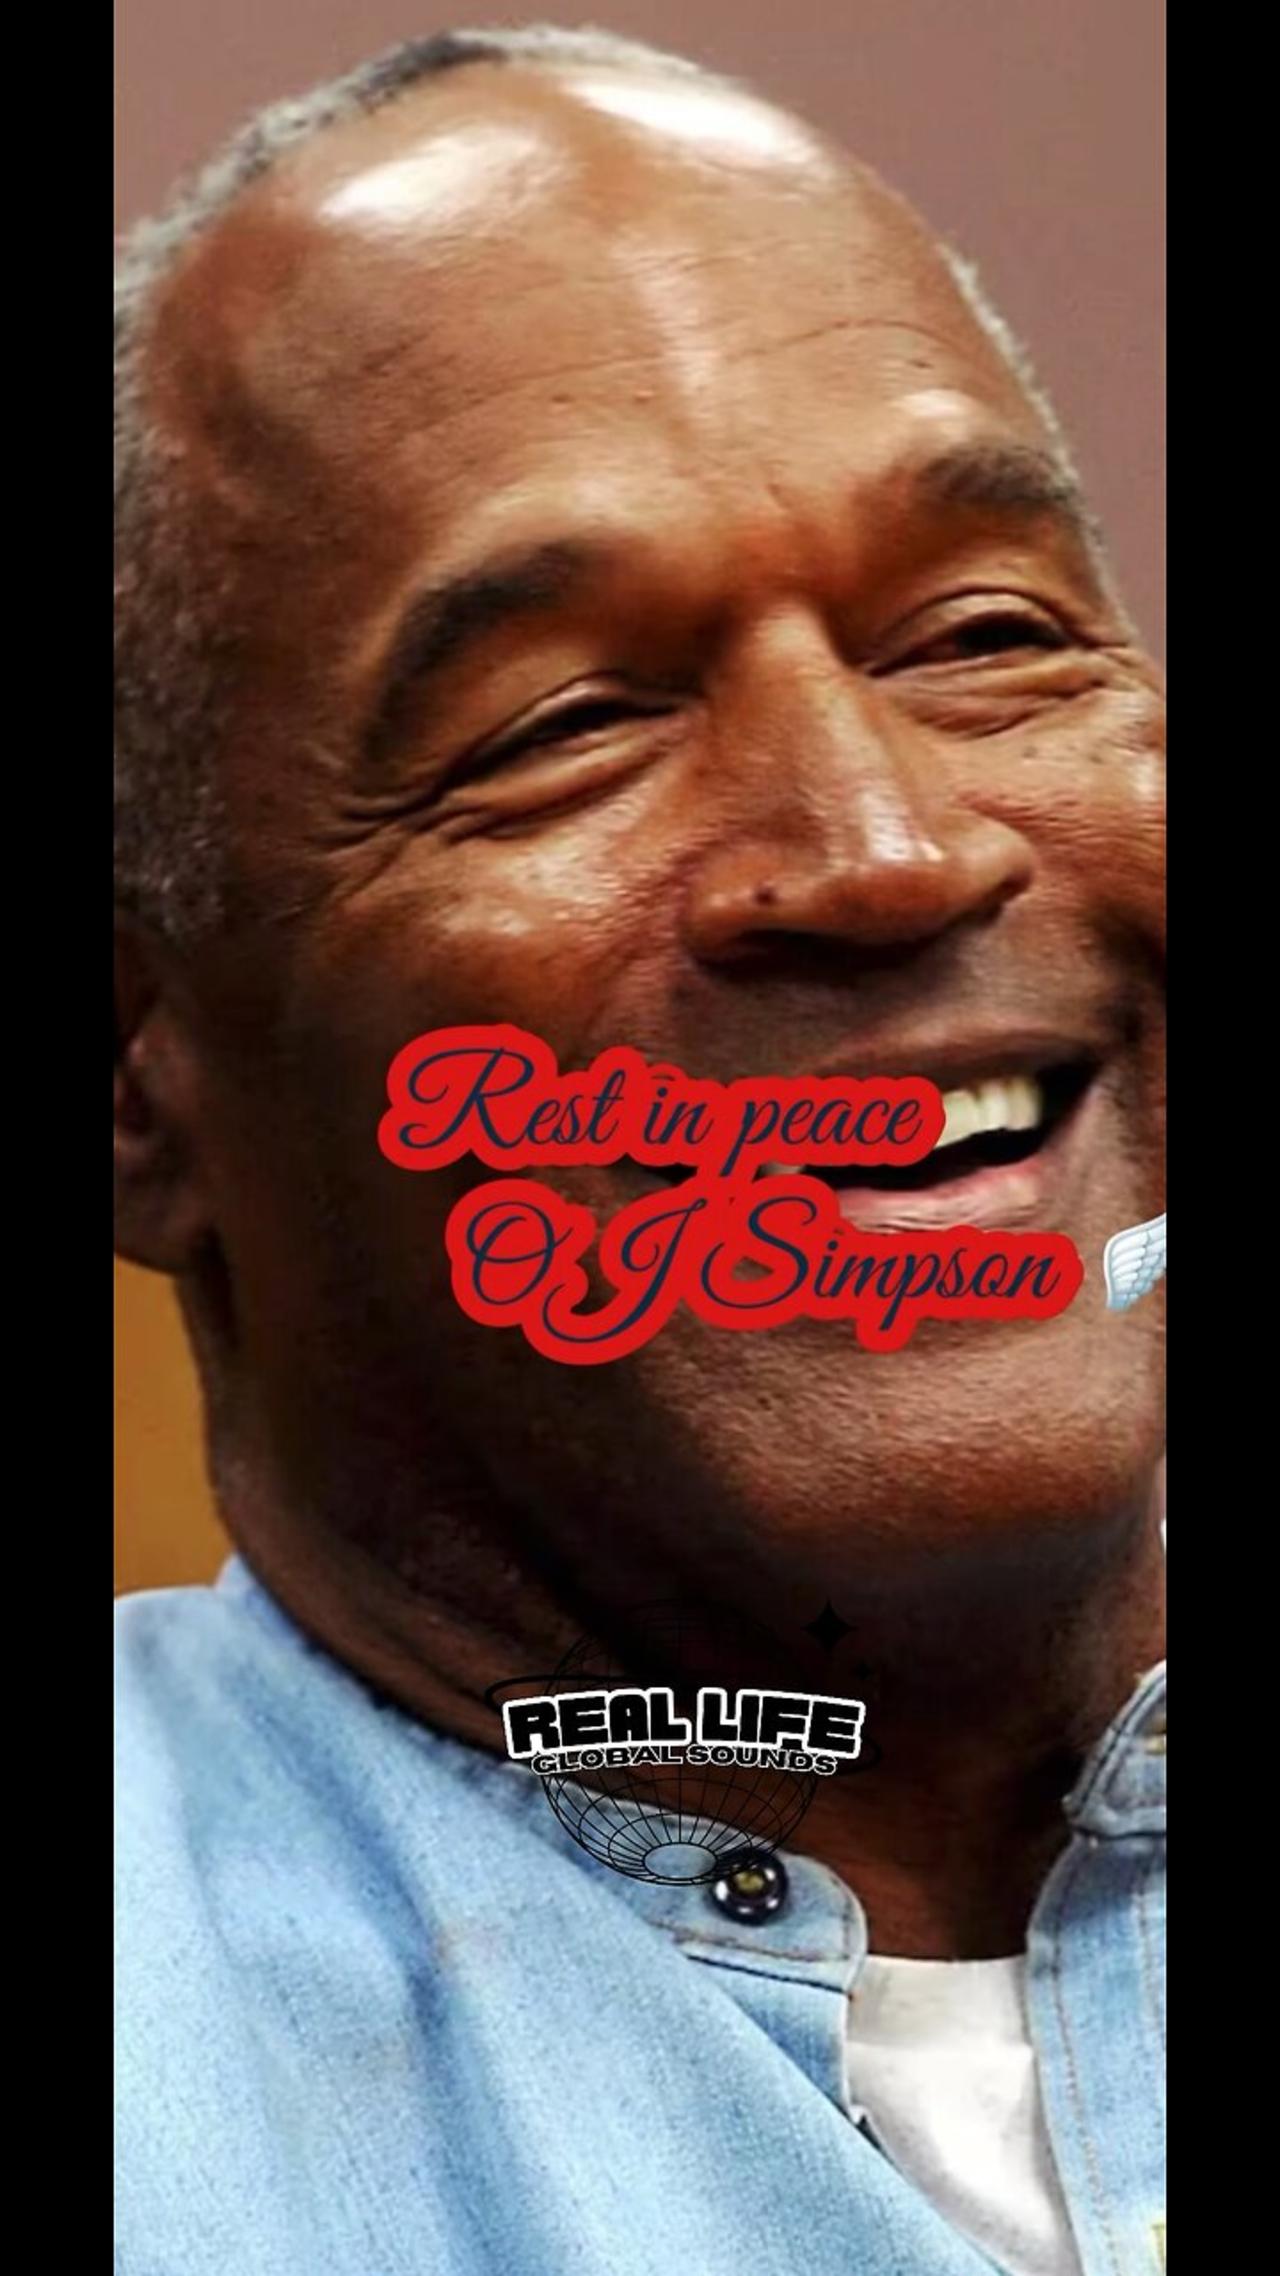 BREAKING: OJ Simpson has passed away after a long battle with cancer, his family announced.